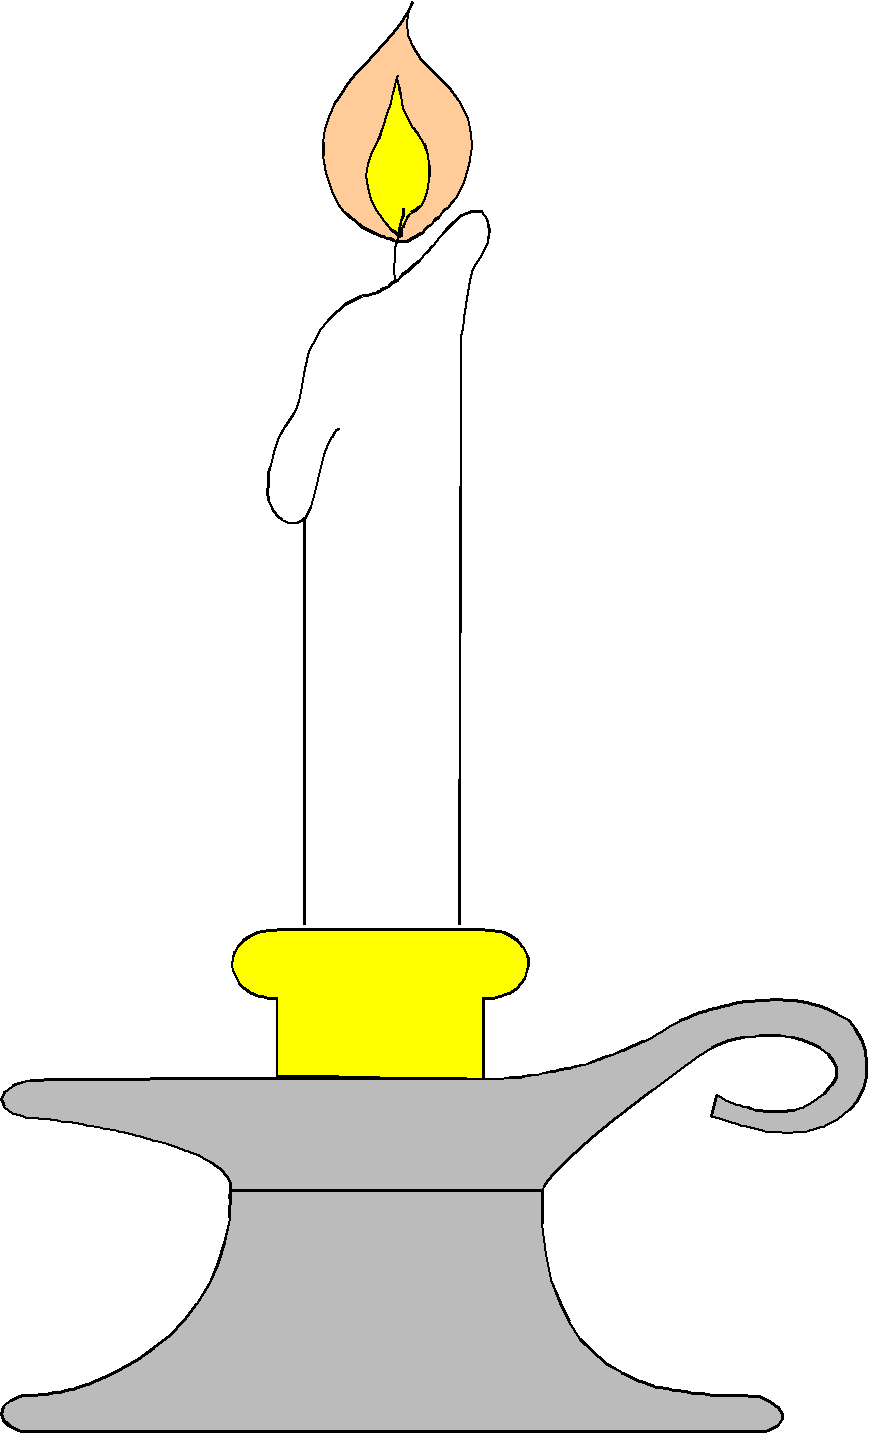 Clip art of candle 